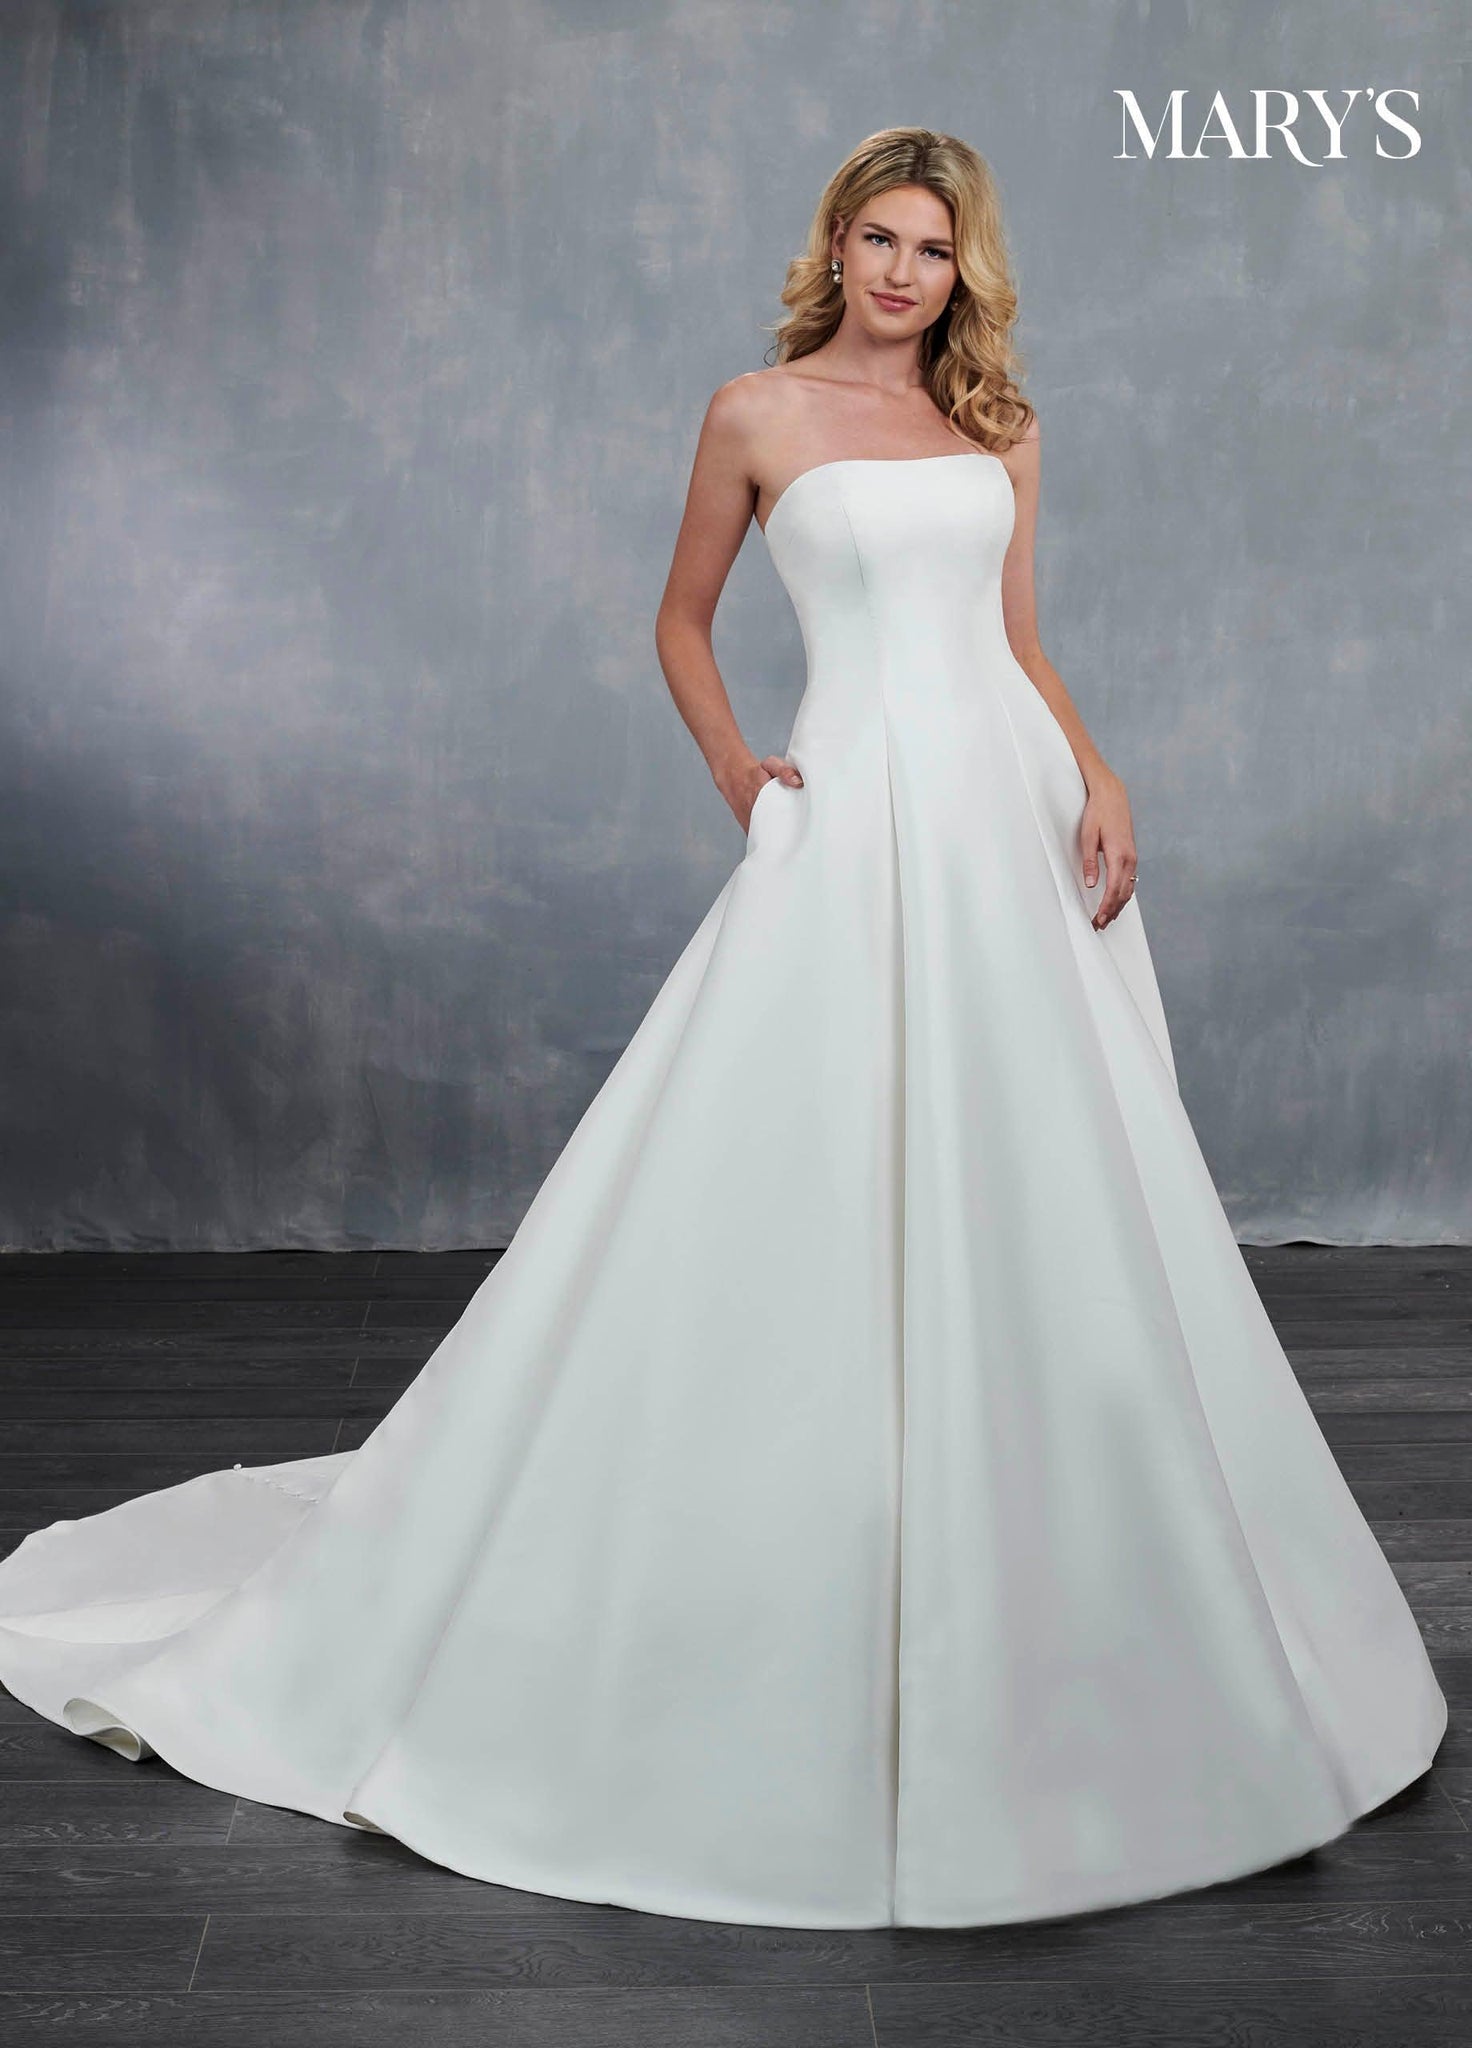 UK18 Constance - Adore Bridal and Occasion Wear